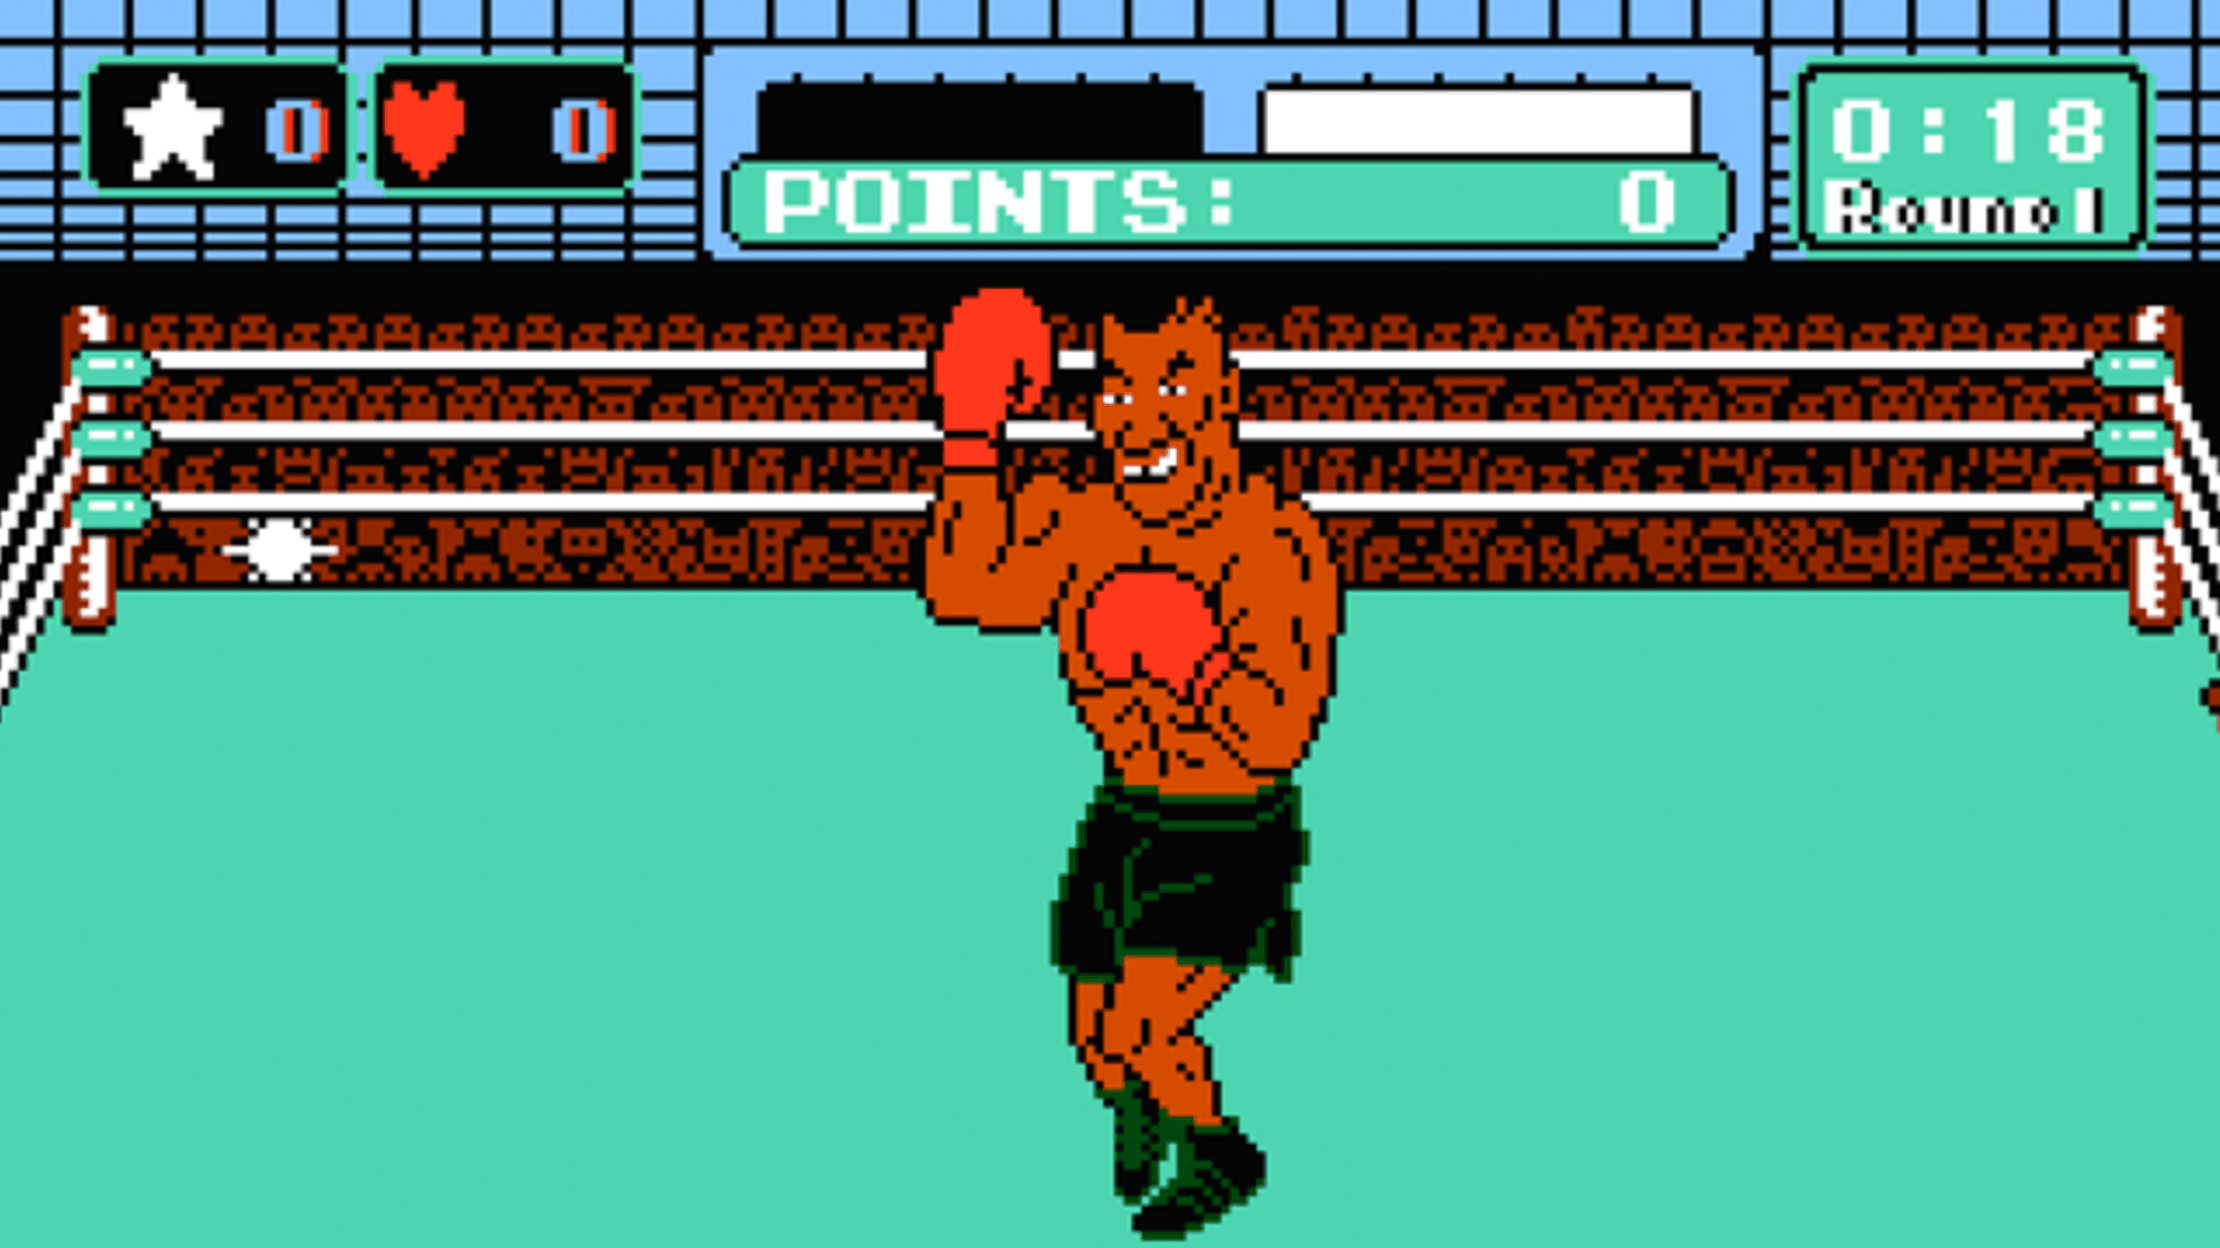 Toughest Video Game Bosses - Mike Tyson - Punch-Out!!